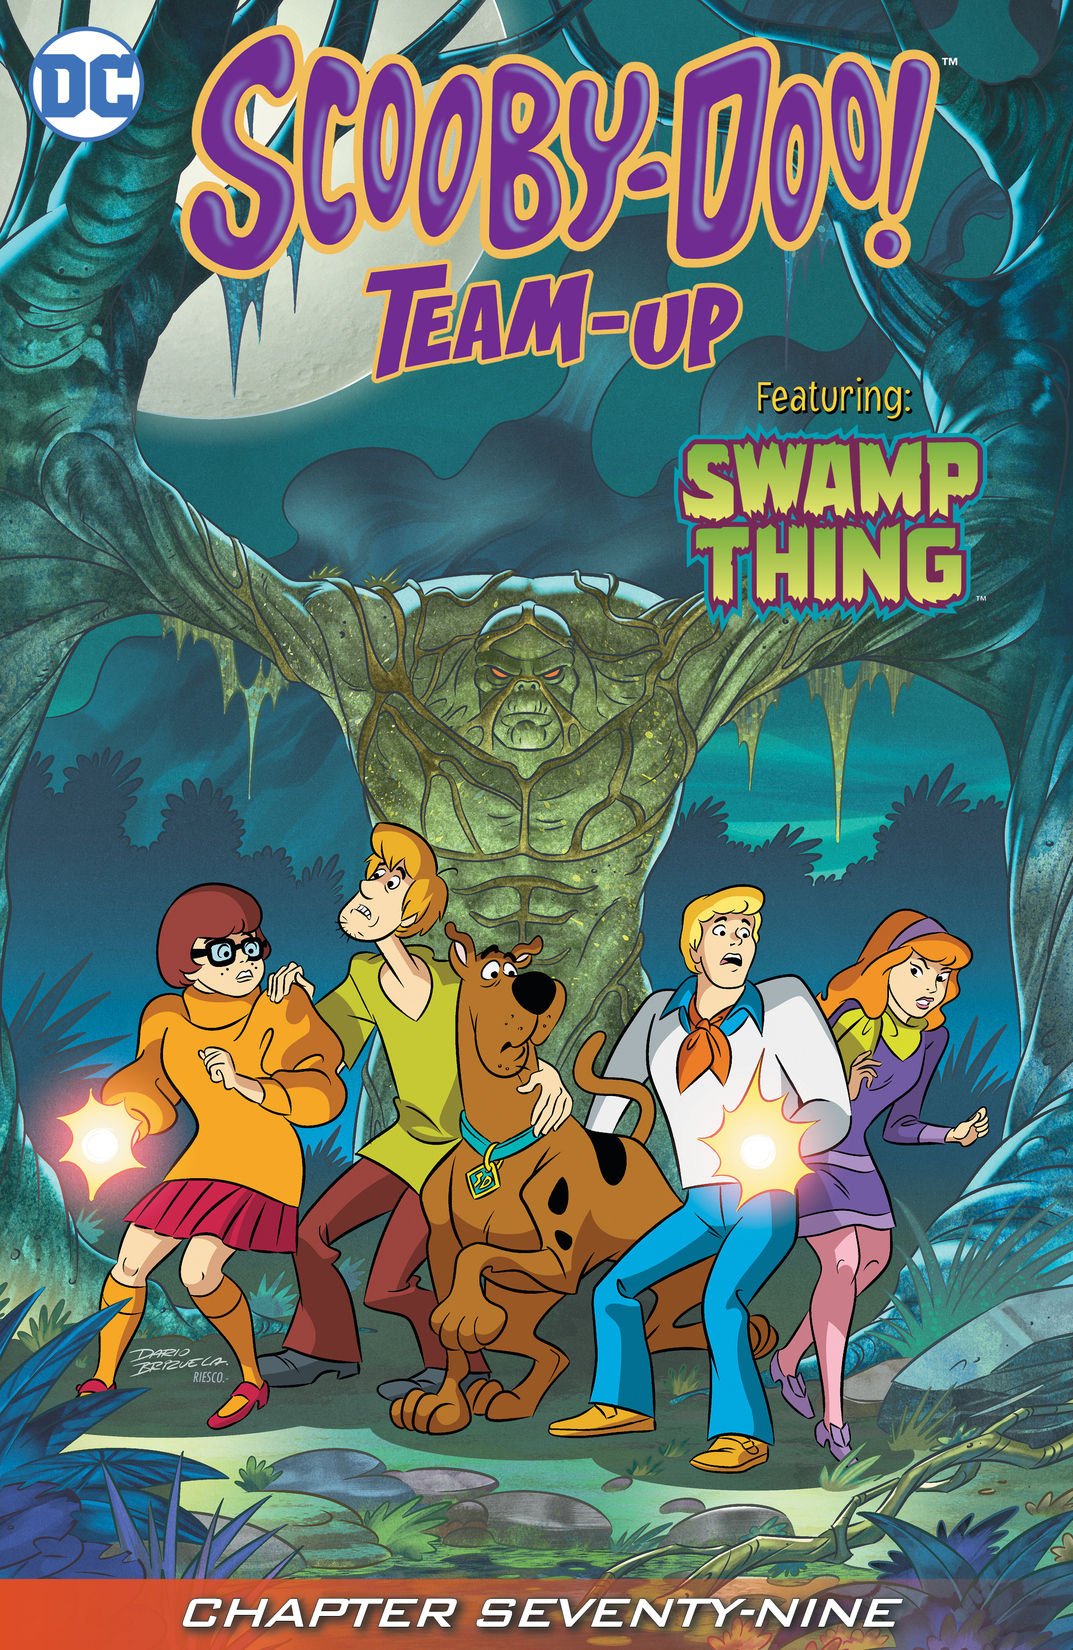 Scooby-Doo Team-Up #79 preview images